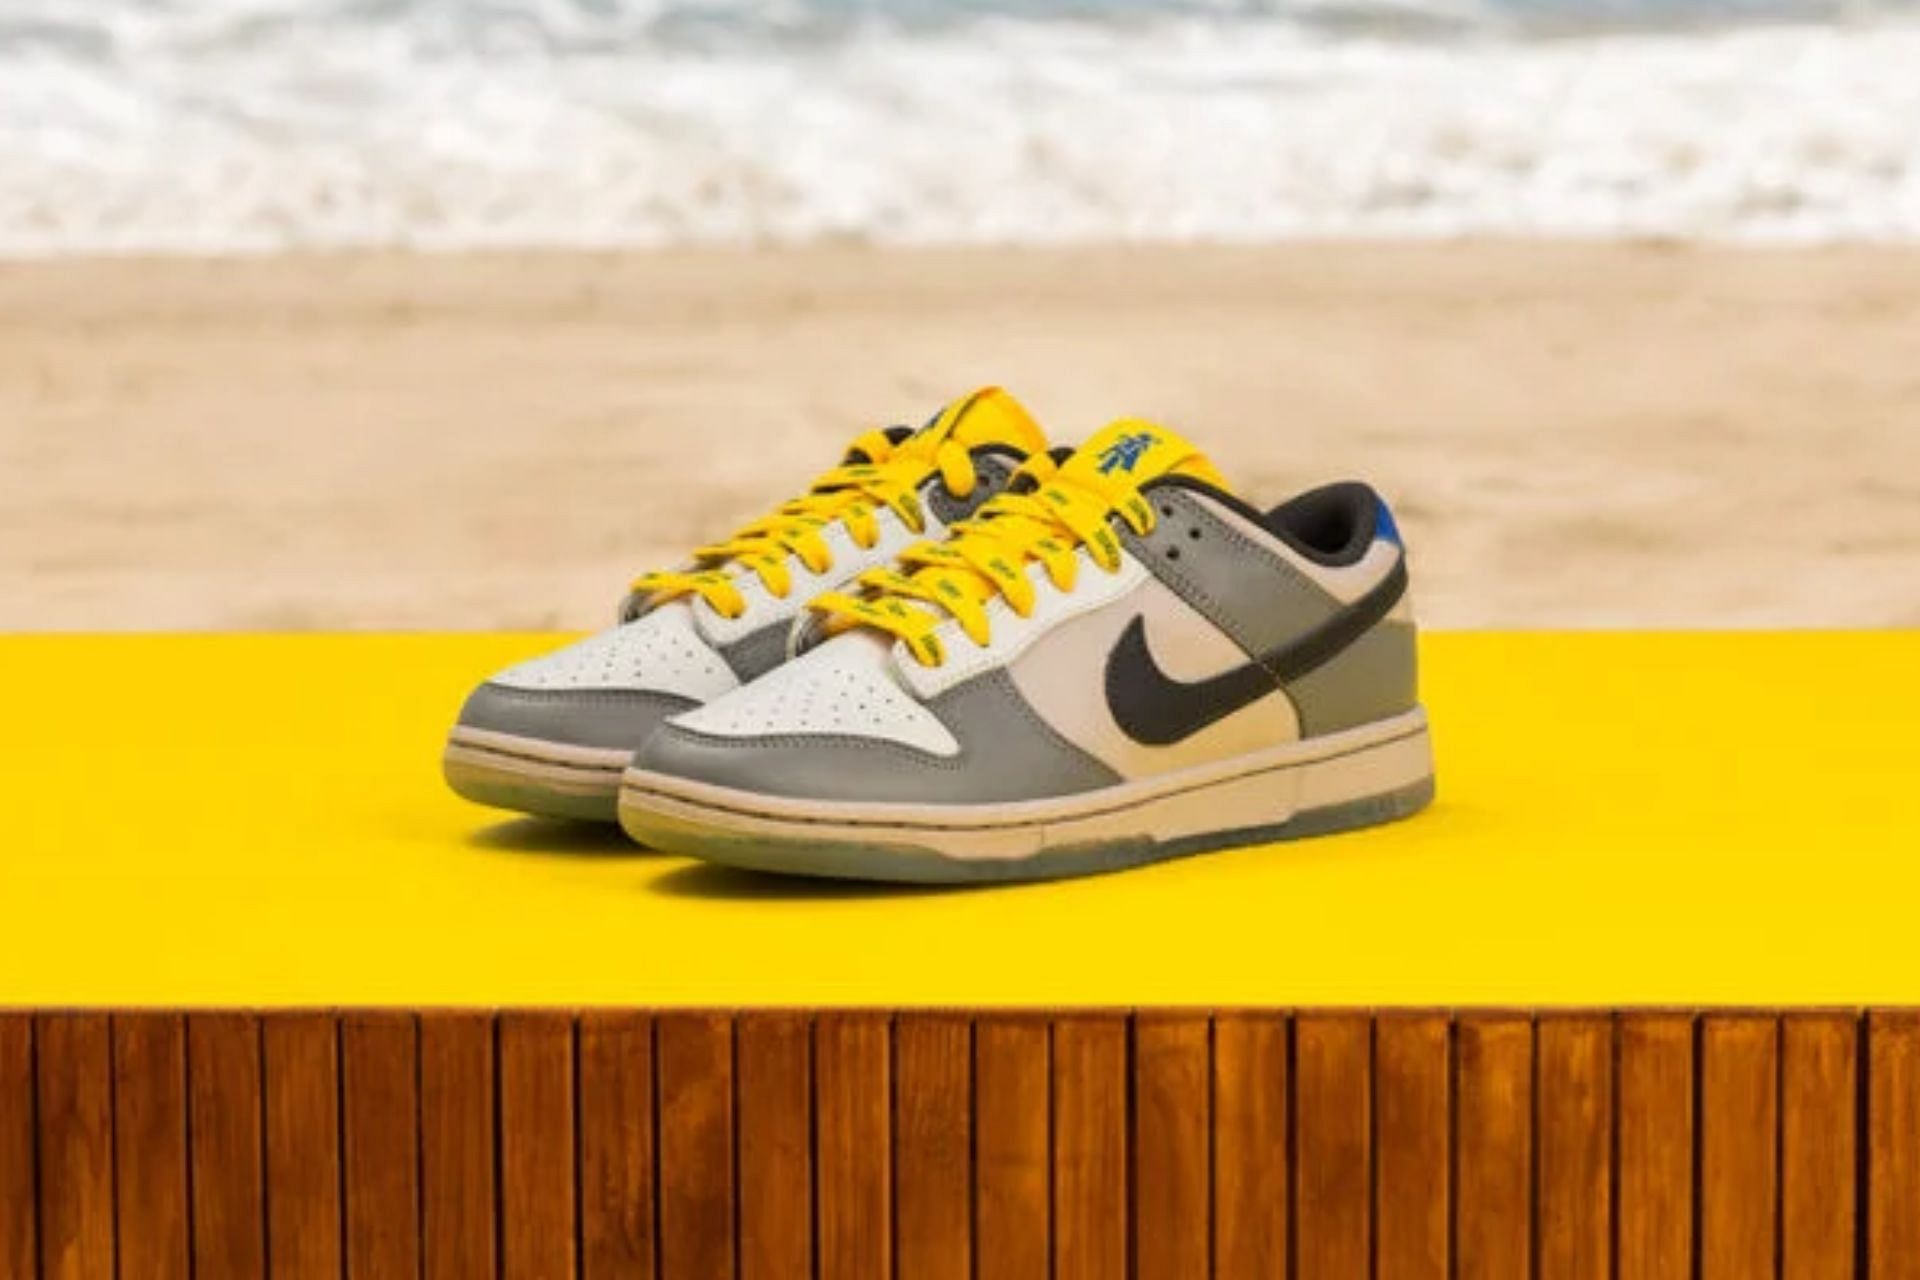 Where roger federer nike tennis shoes to buy Nike Dunk Low x North Carolina A&T "Ayantee" shoes